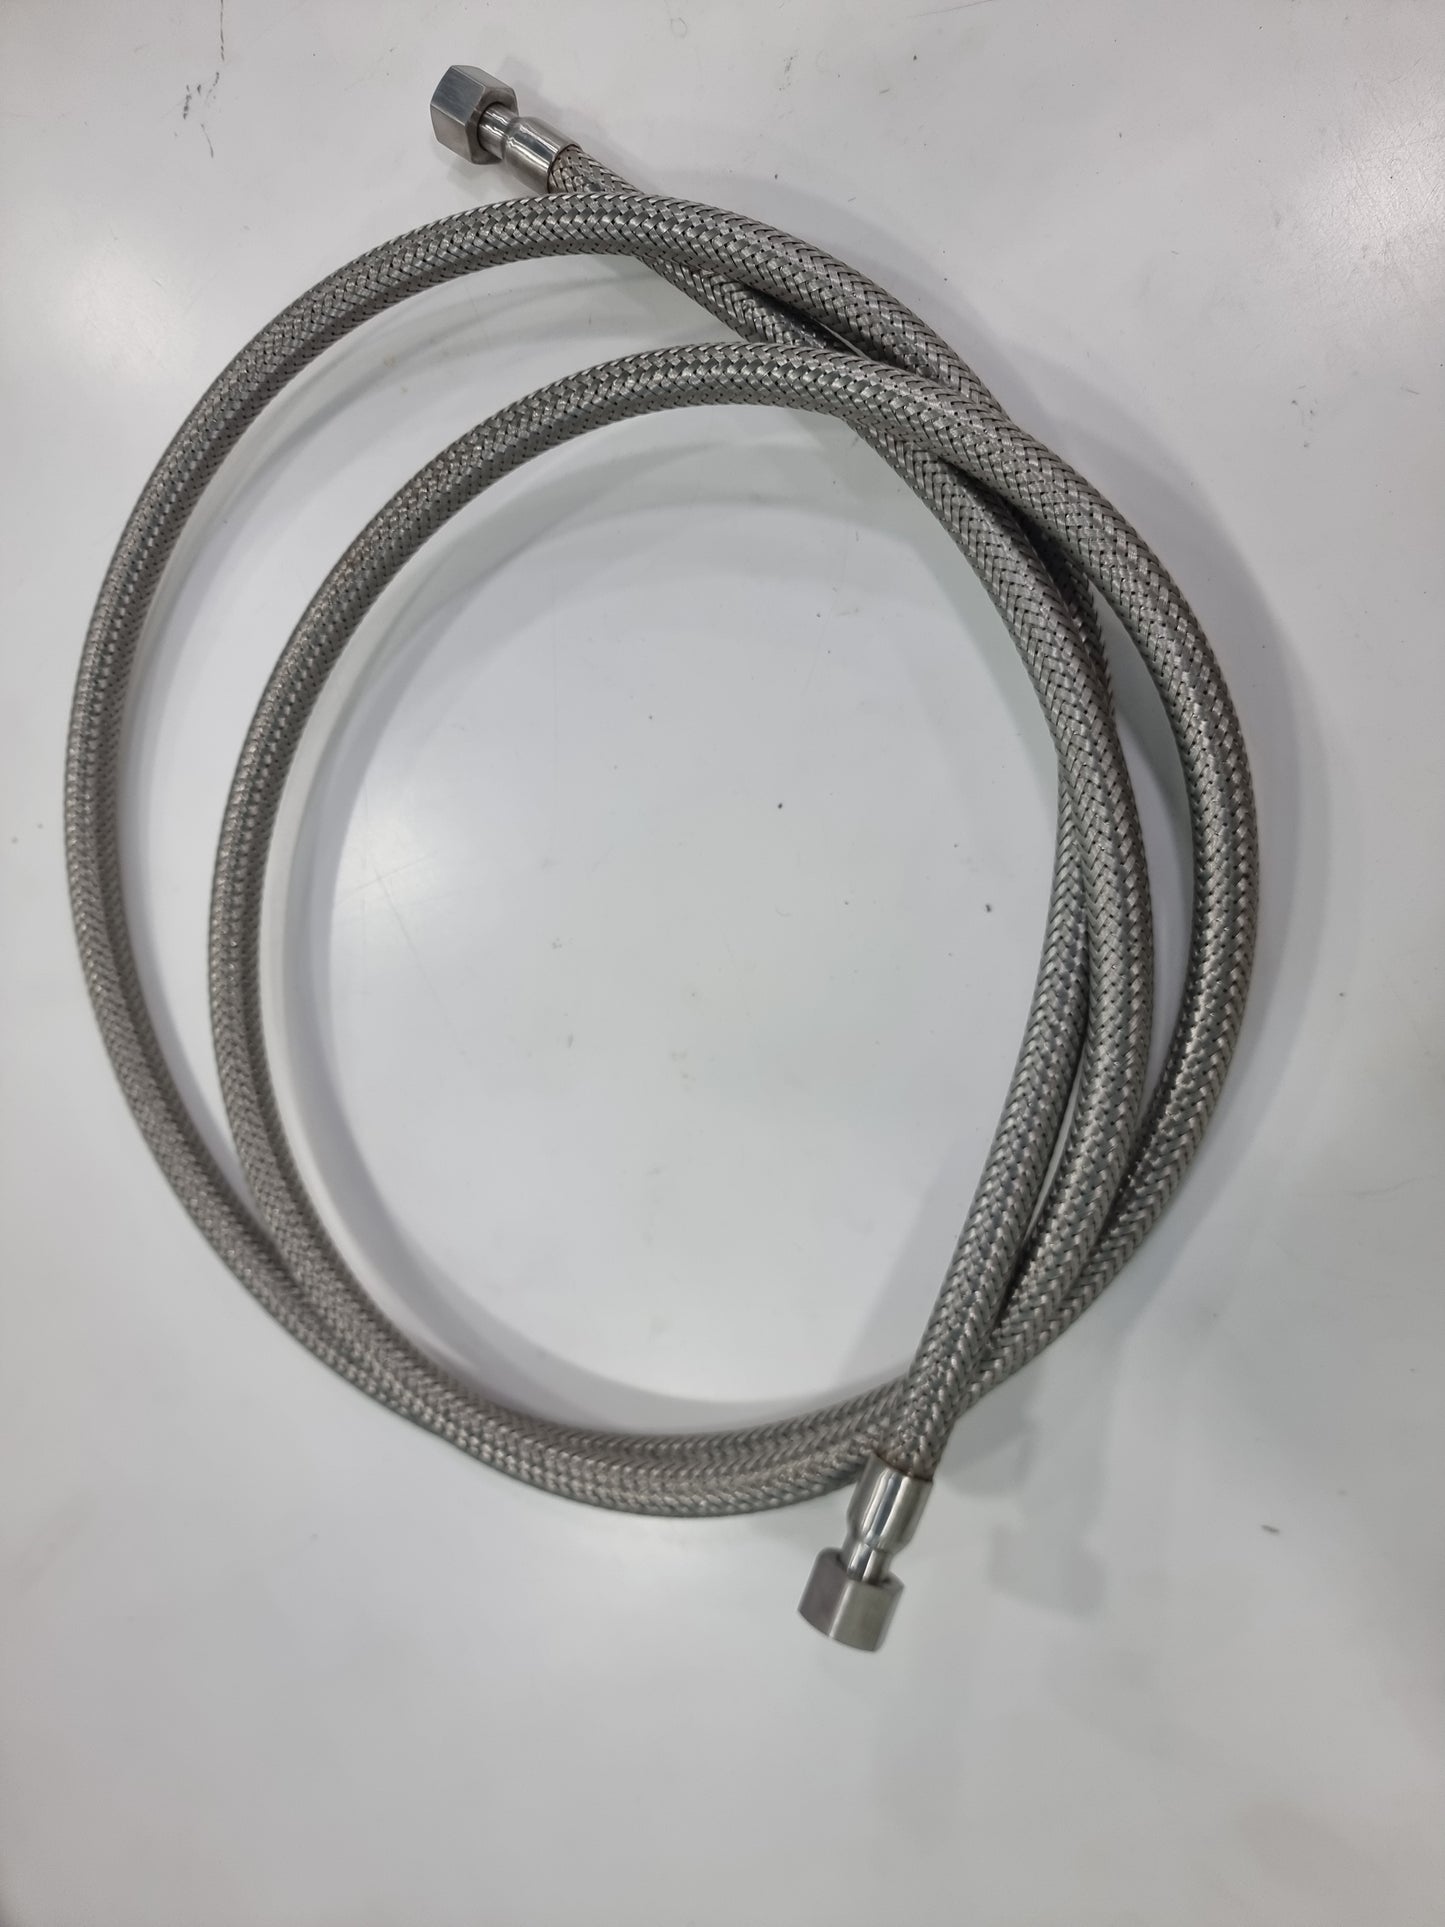 SS 304 FLEXIBLE HOSE ASSEMBLY 1/2" X 1 MTR. FEMALE BOTH END